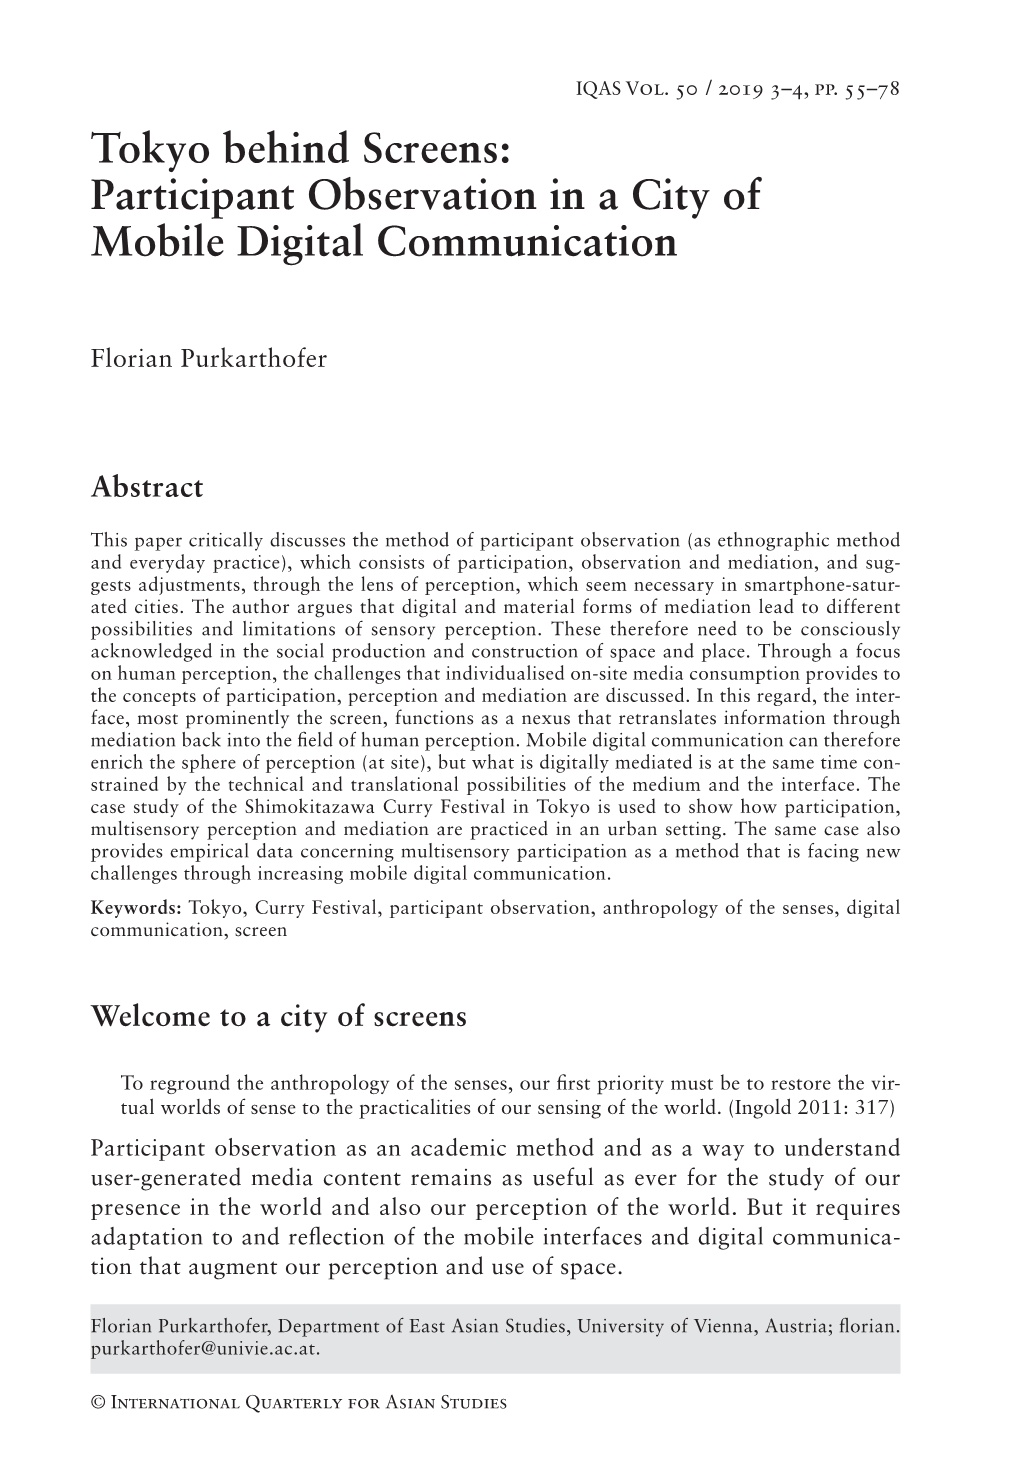 Tokyo Behind Screens: Participant Observation in a City of Mobile Digital Communication